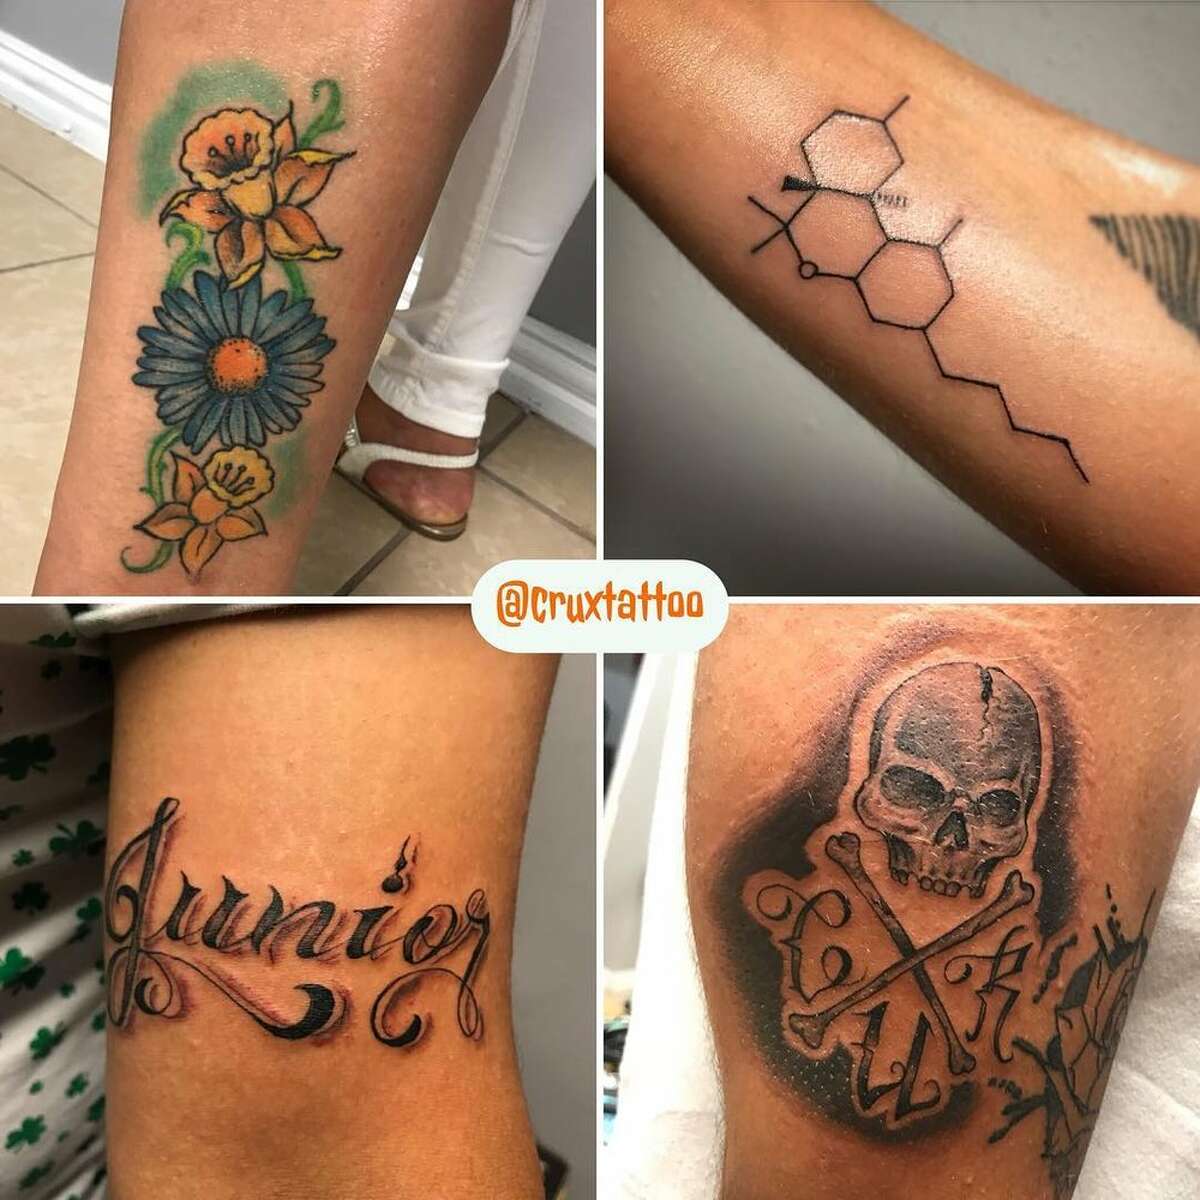 The top-rated tattoo shops around Houston, according to Yelp